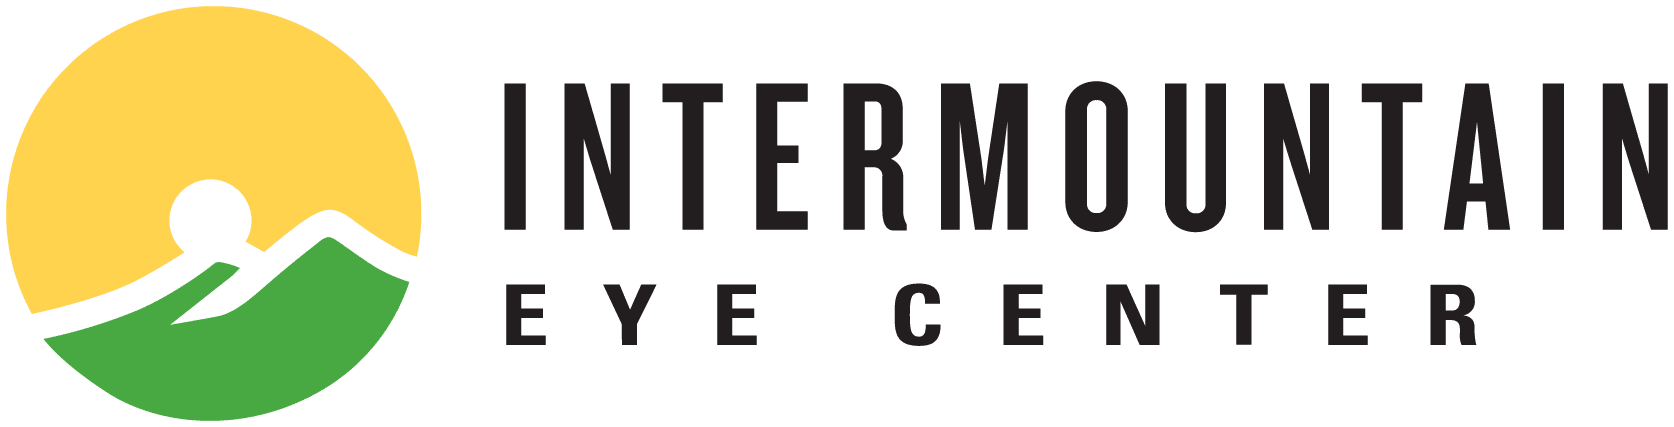 Intermountain Eye Center's logo depicting a yellow glowing sun rising above green mountains to the left of the name.